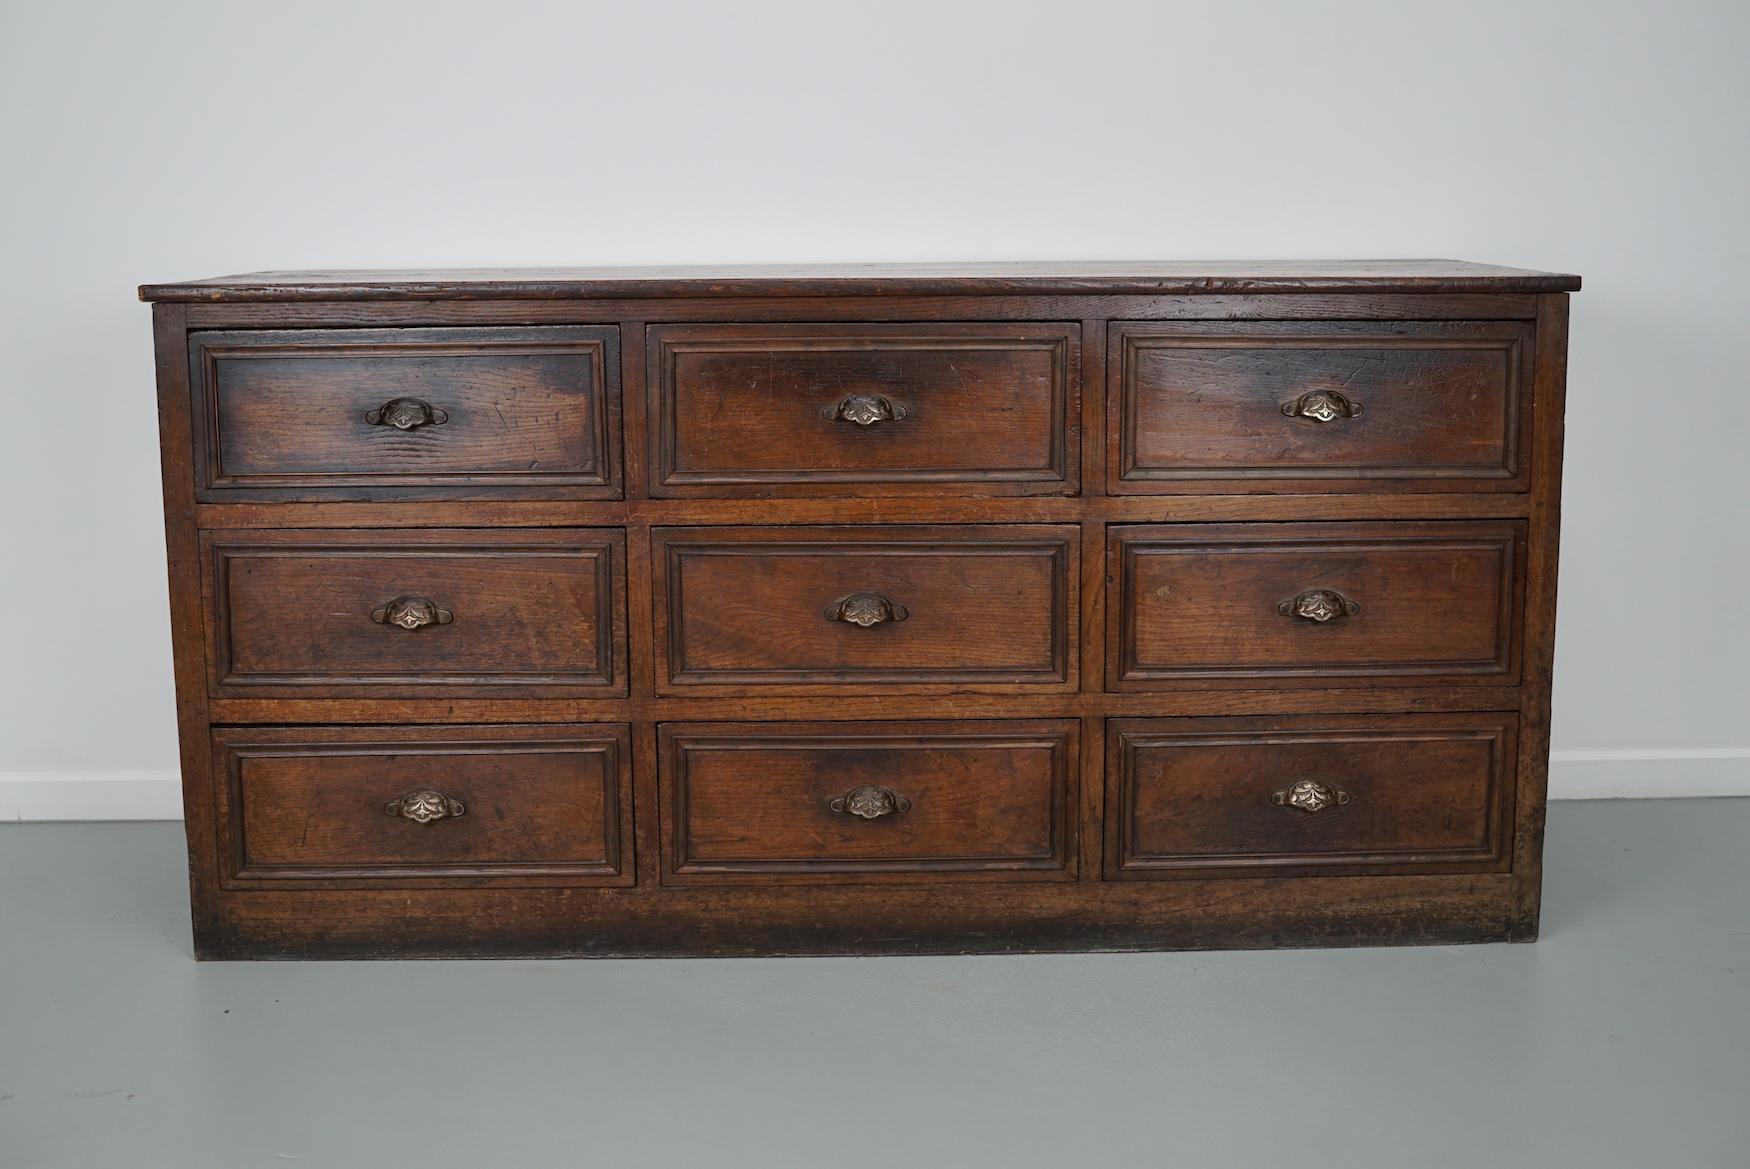 Antique French Oak & Fruitwood Apothecary / Filing Cabinet, Early 20th Century For Sale 2